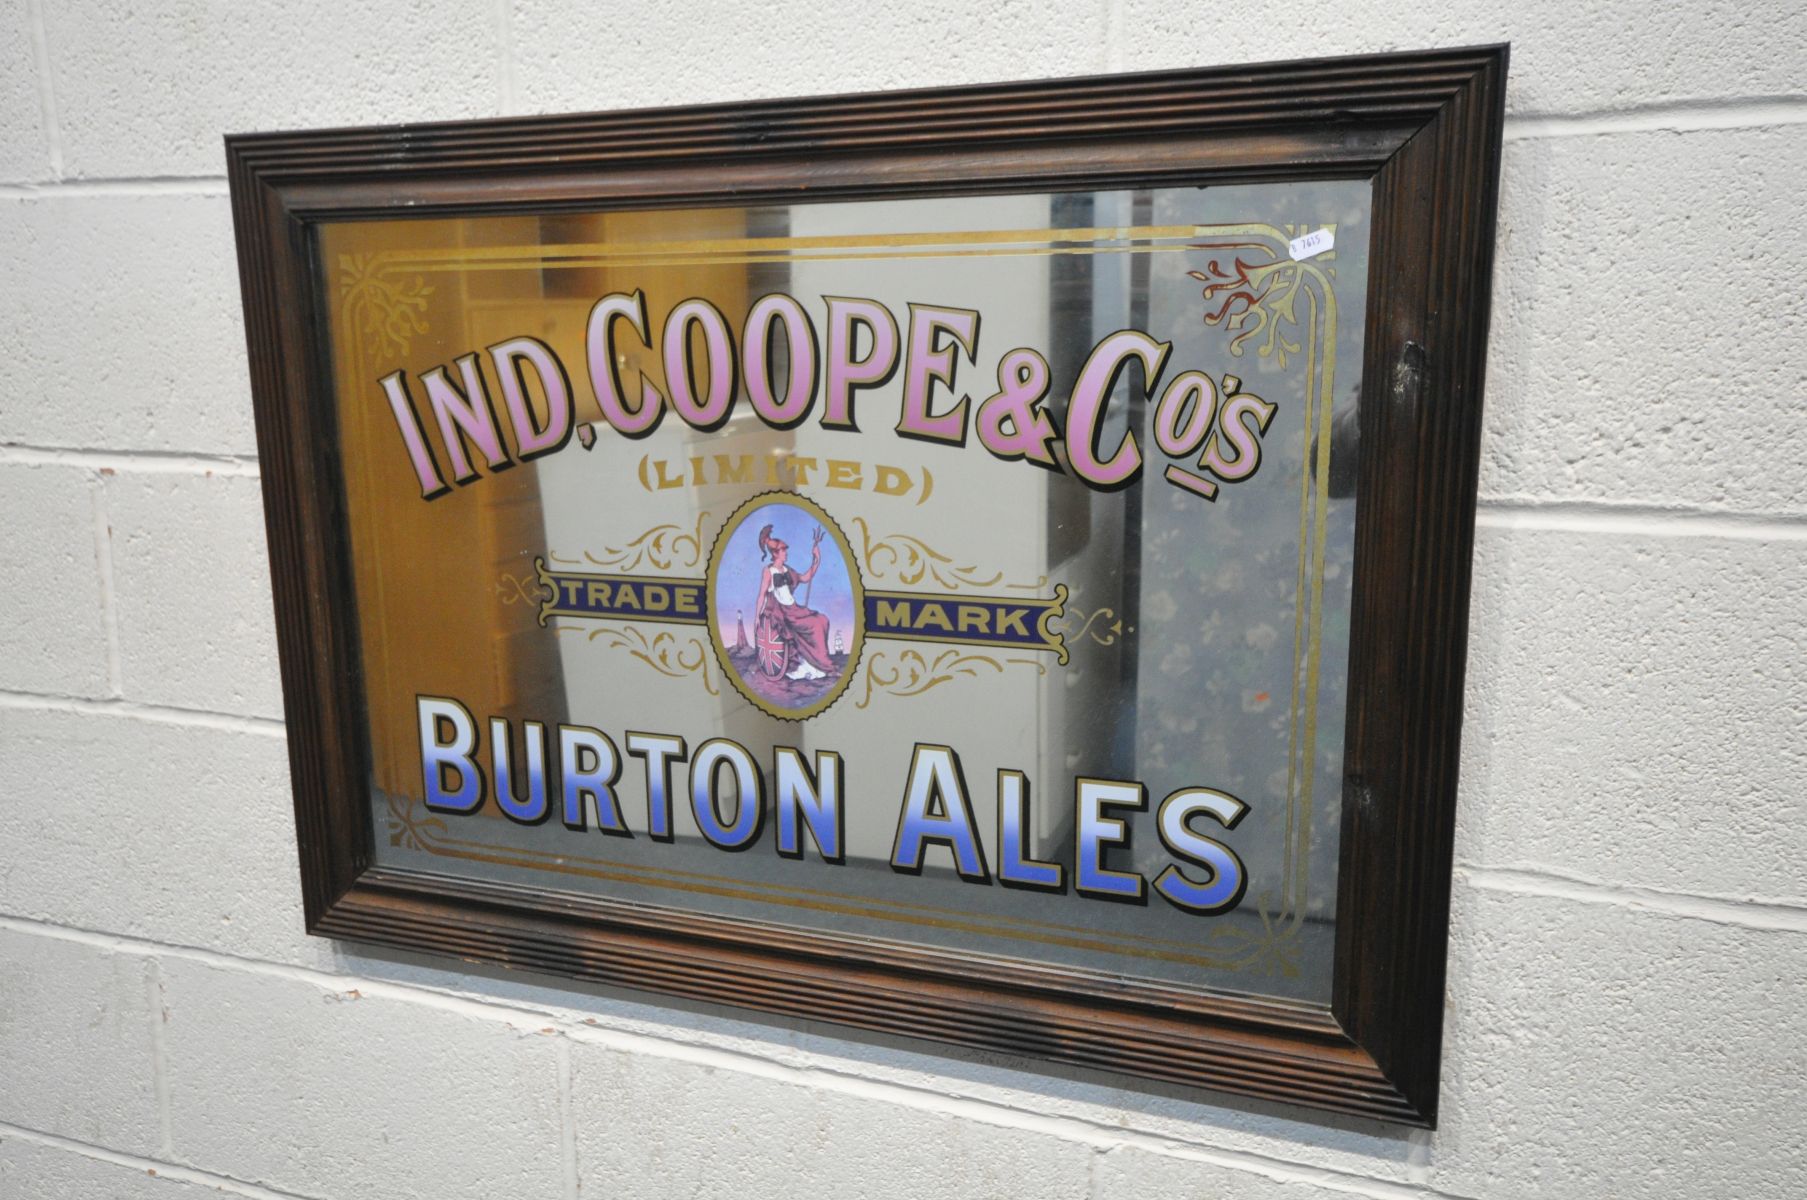 A IND, COOPE & CO'S LIMITED PUB ADVERTISING MIRROR, reading trade mark and Burton ales below,